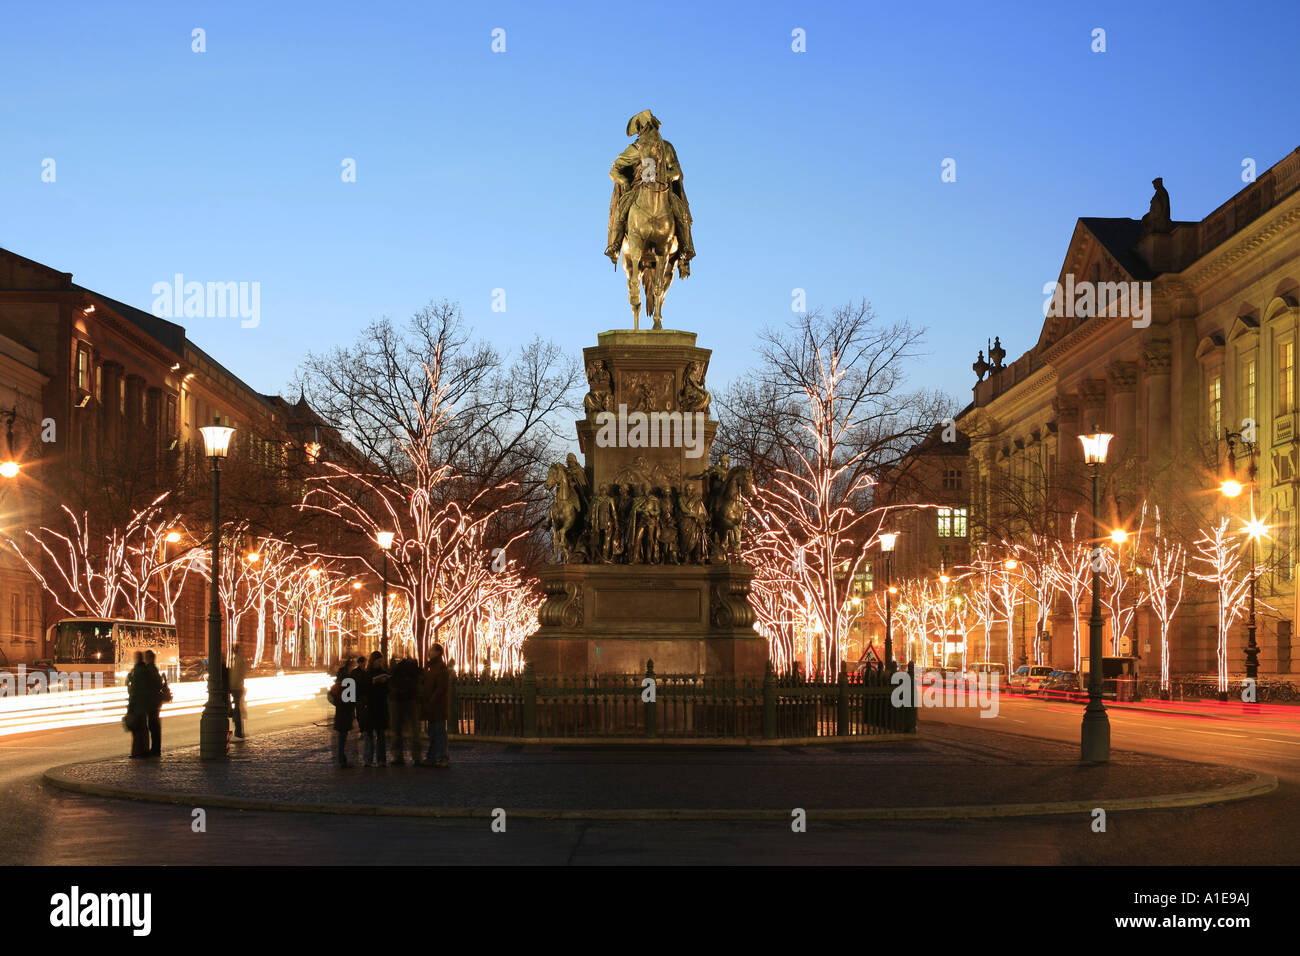 the statue of Frederick the Great in the middle of Unter den Linden in Berlin in christmasy light, Germany, Berlin Stock Photo